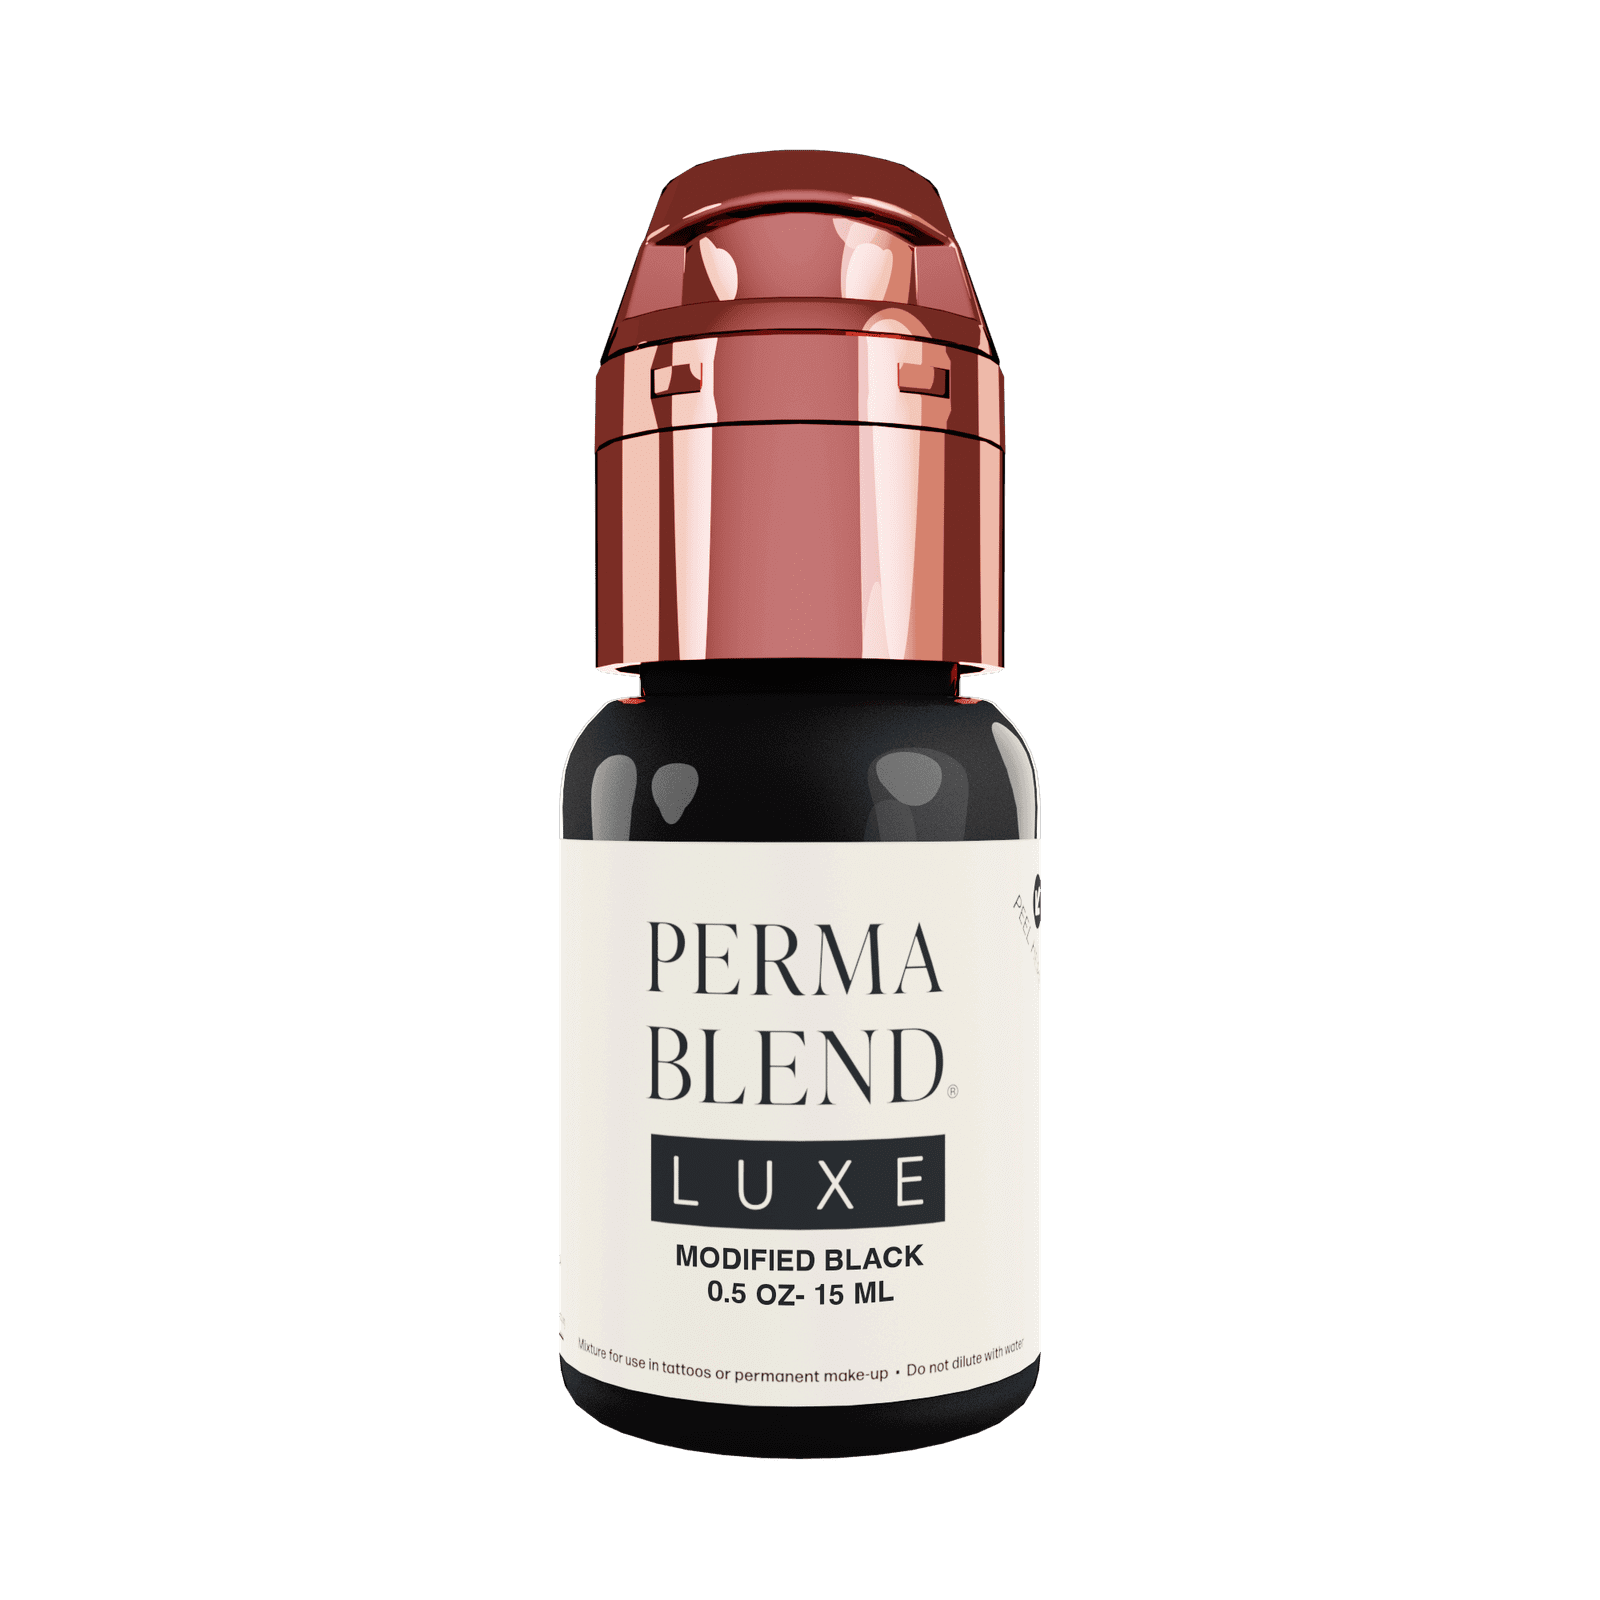 Perma Blend Luxe Modified Black